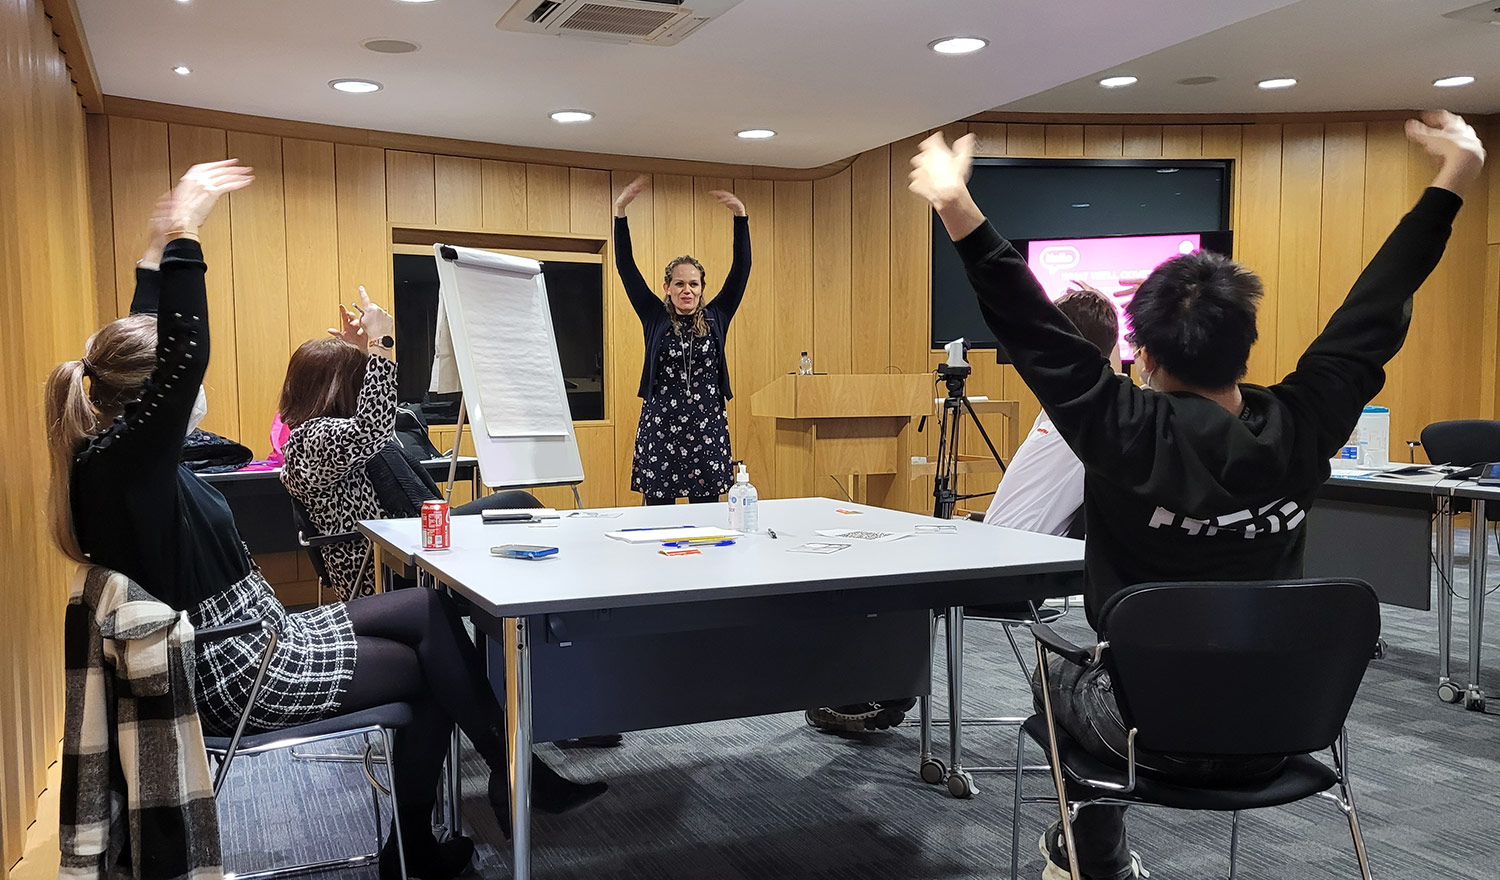 A wellbeing awareness workshop hosted by Bruntwood SciTech on Melbourn Science Park